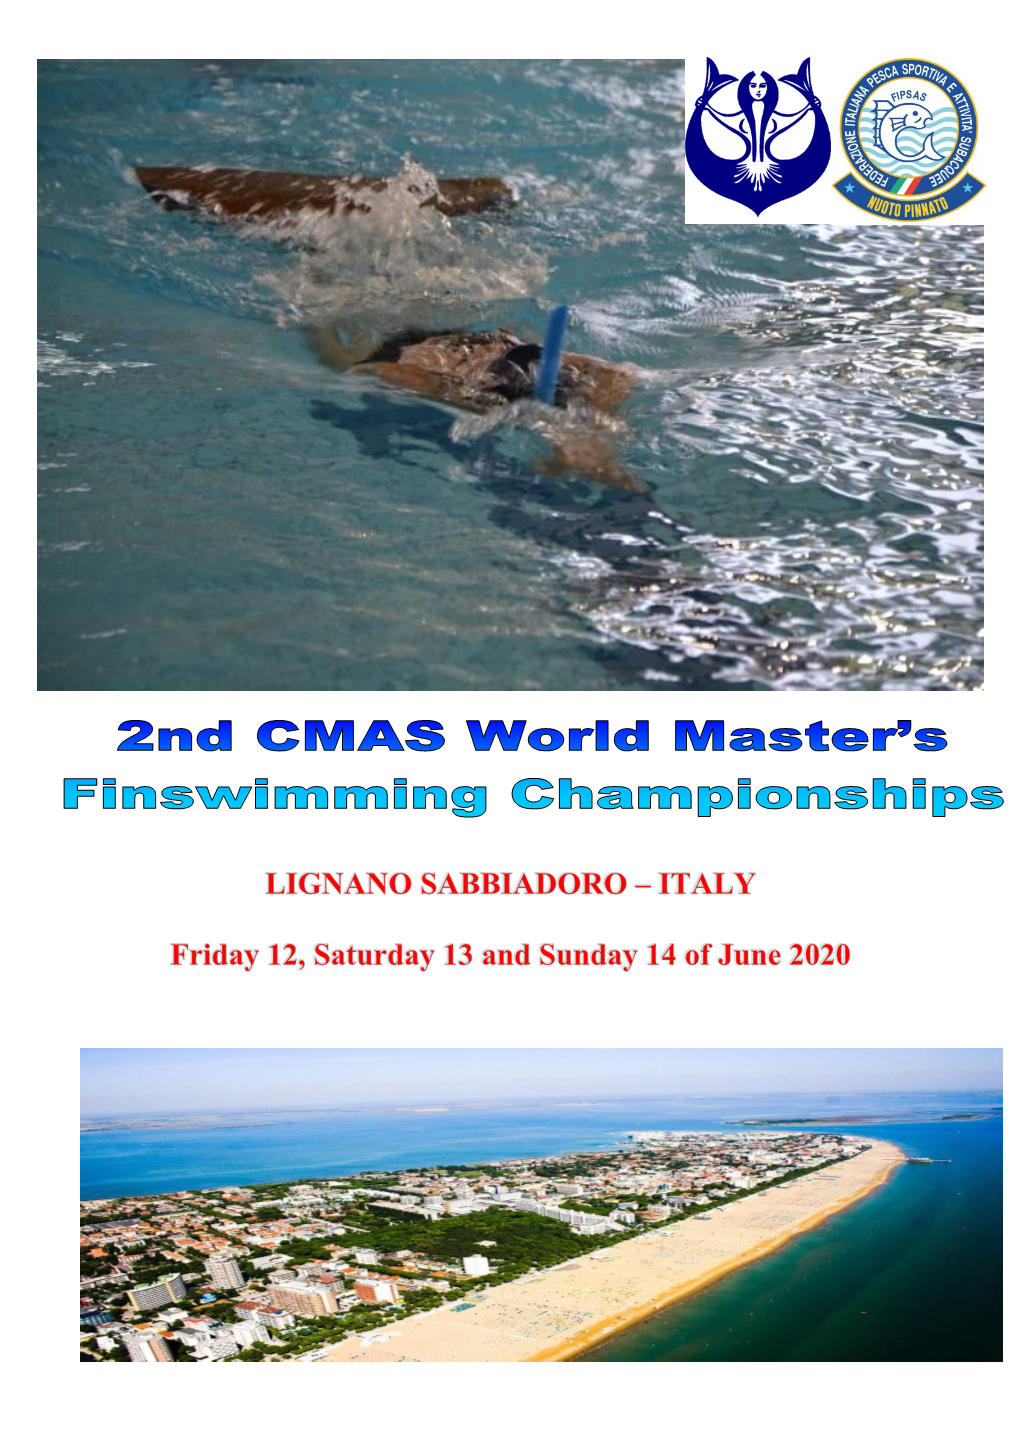 SPECIFIC RULES 1 – DENOMINATION: the “Underwater Activities International Events” Organizing Committee with the Agreement of C.M.A.S